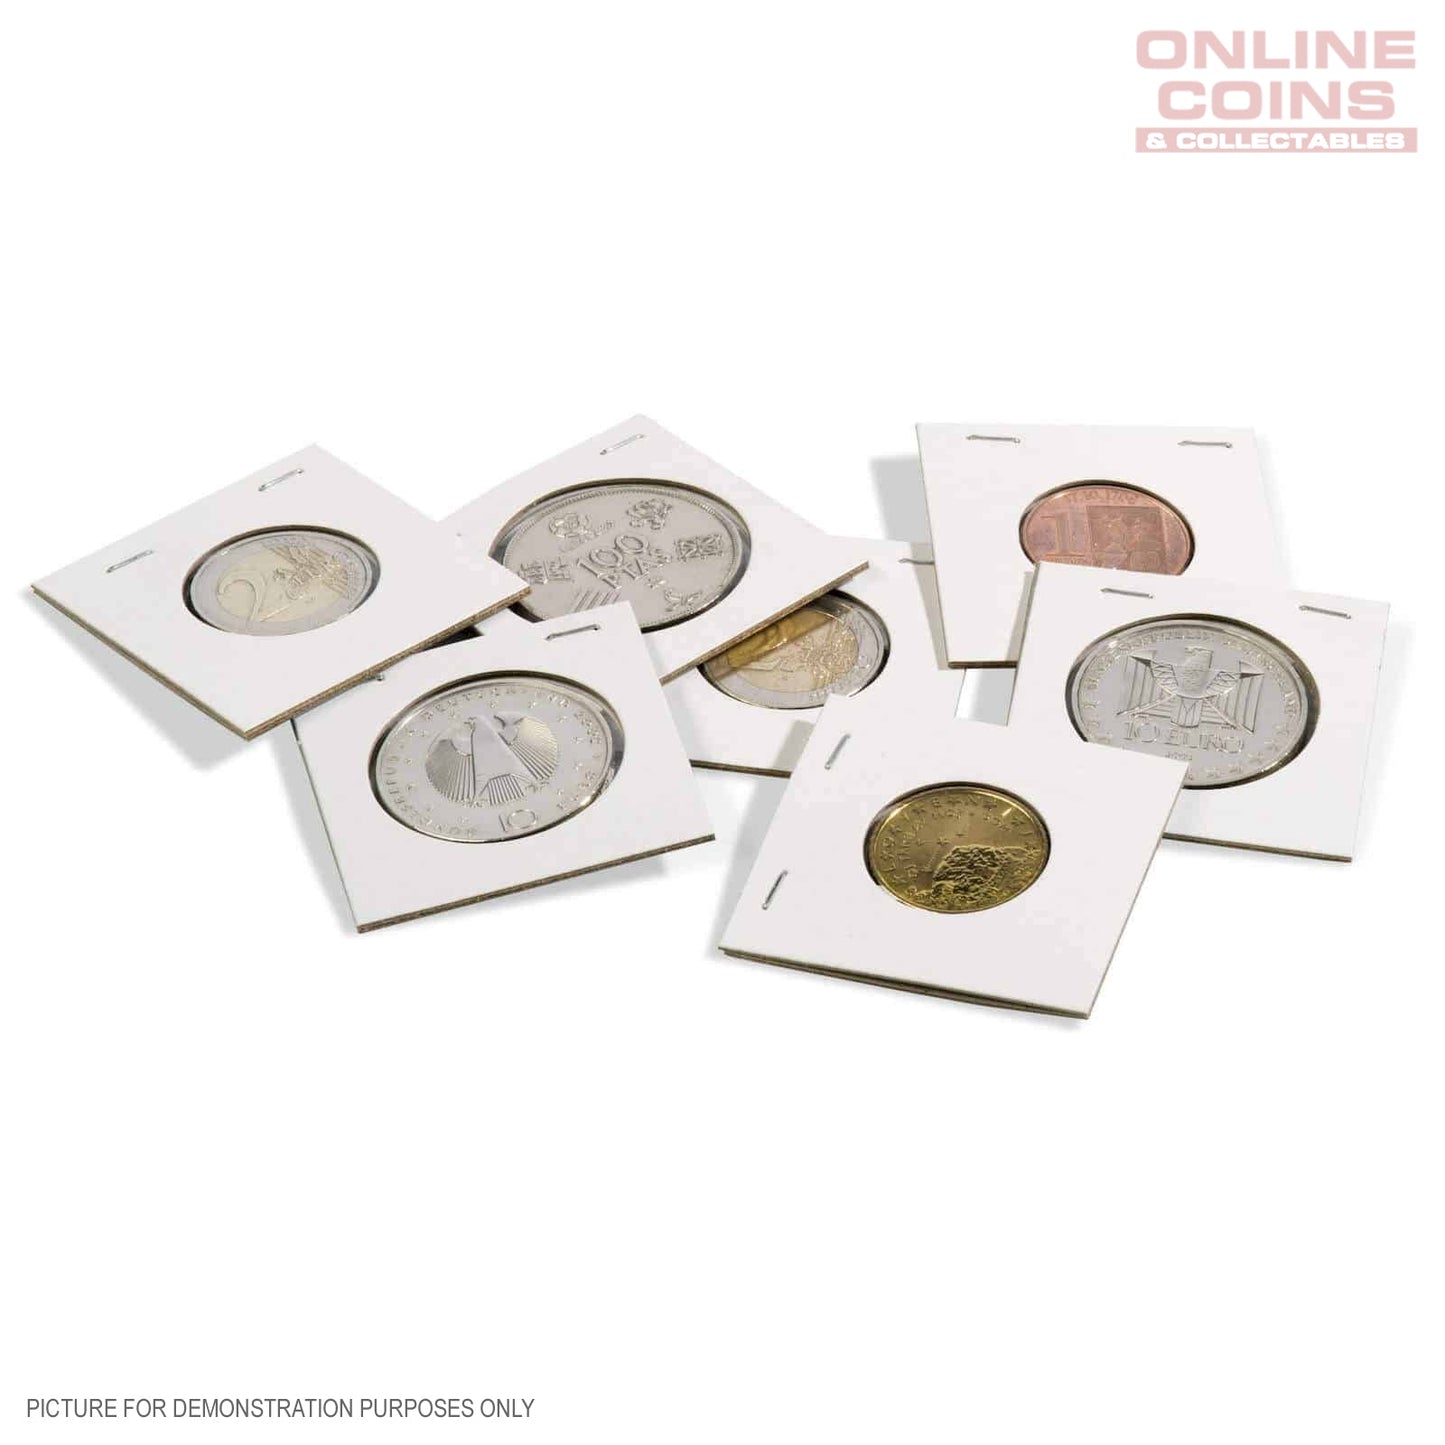 Lighthouse TACK WHITE 32.5mm Staple 2"x2" Coin Holders  (Suitable For Australian ROUND 50c Coins And Pennies)